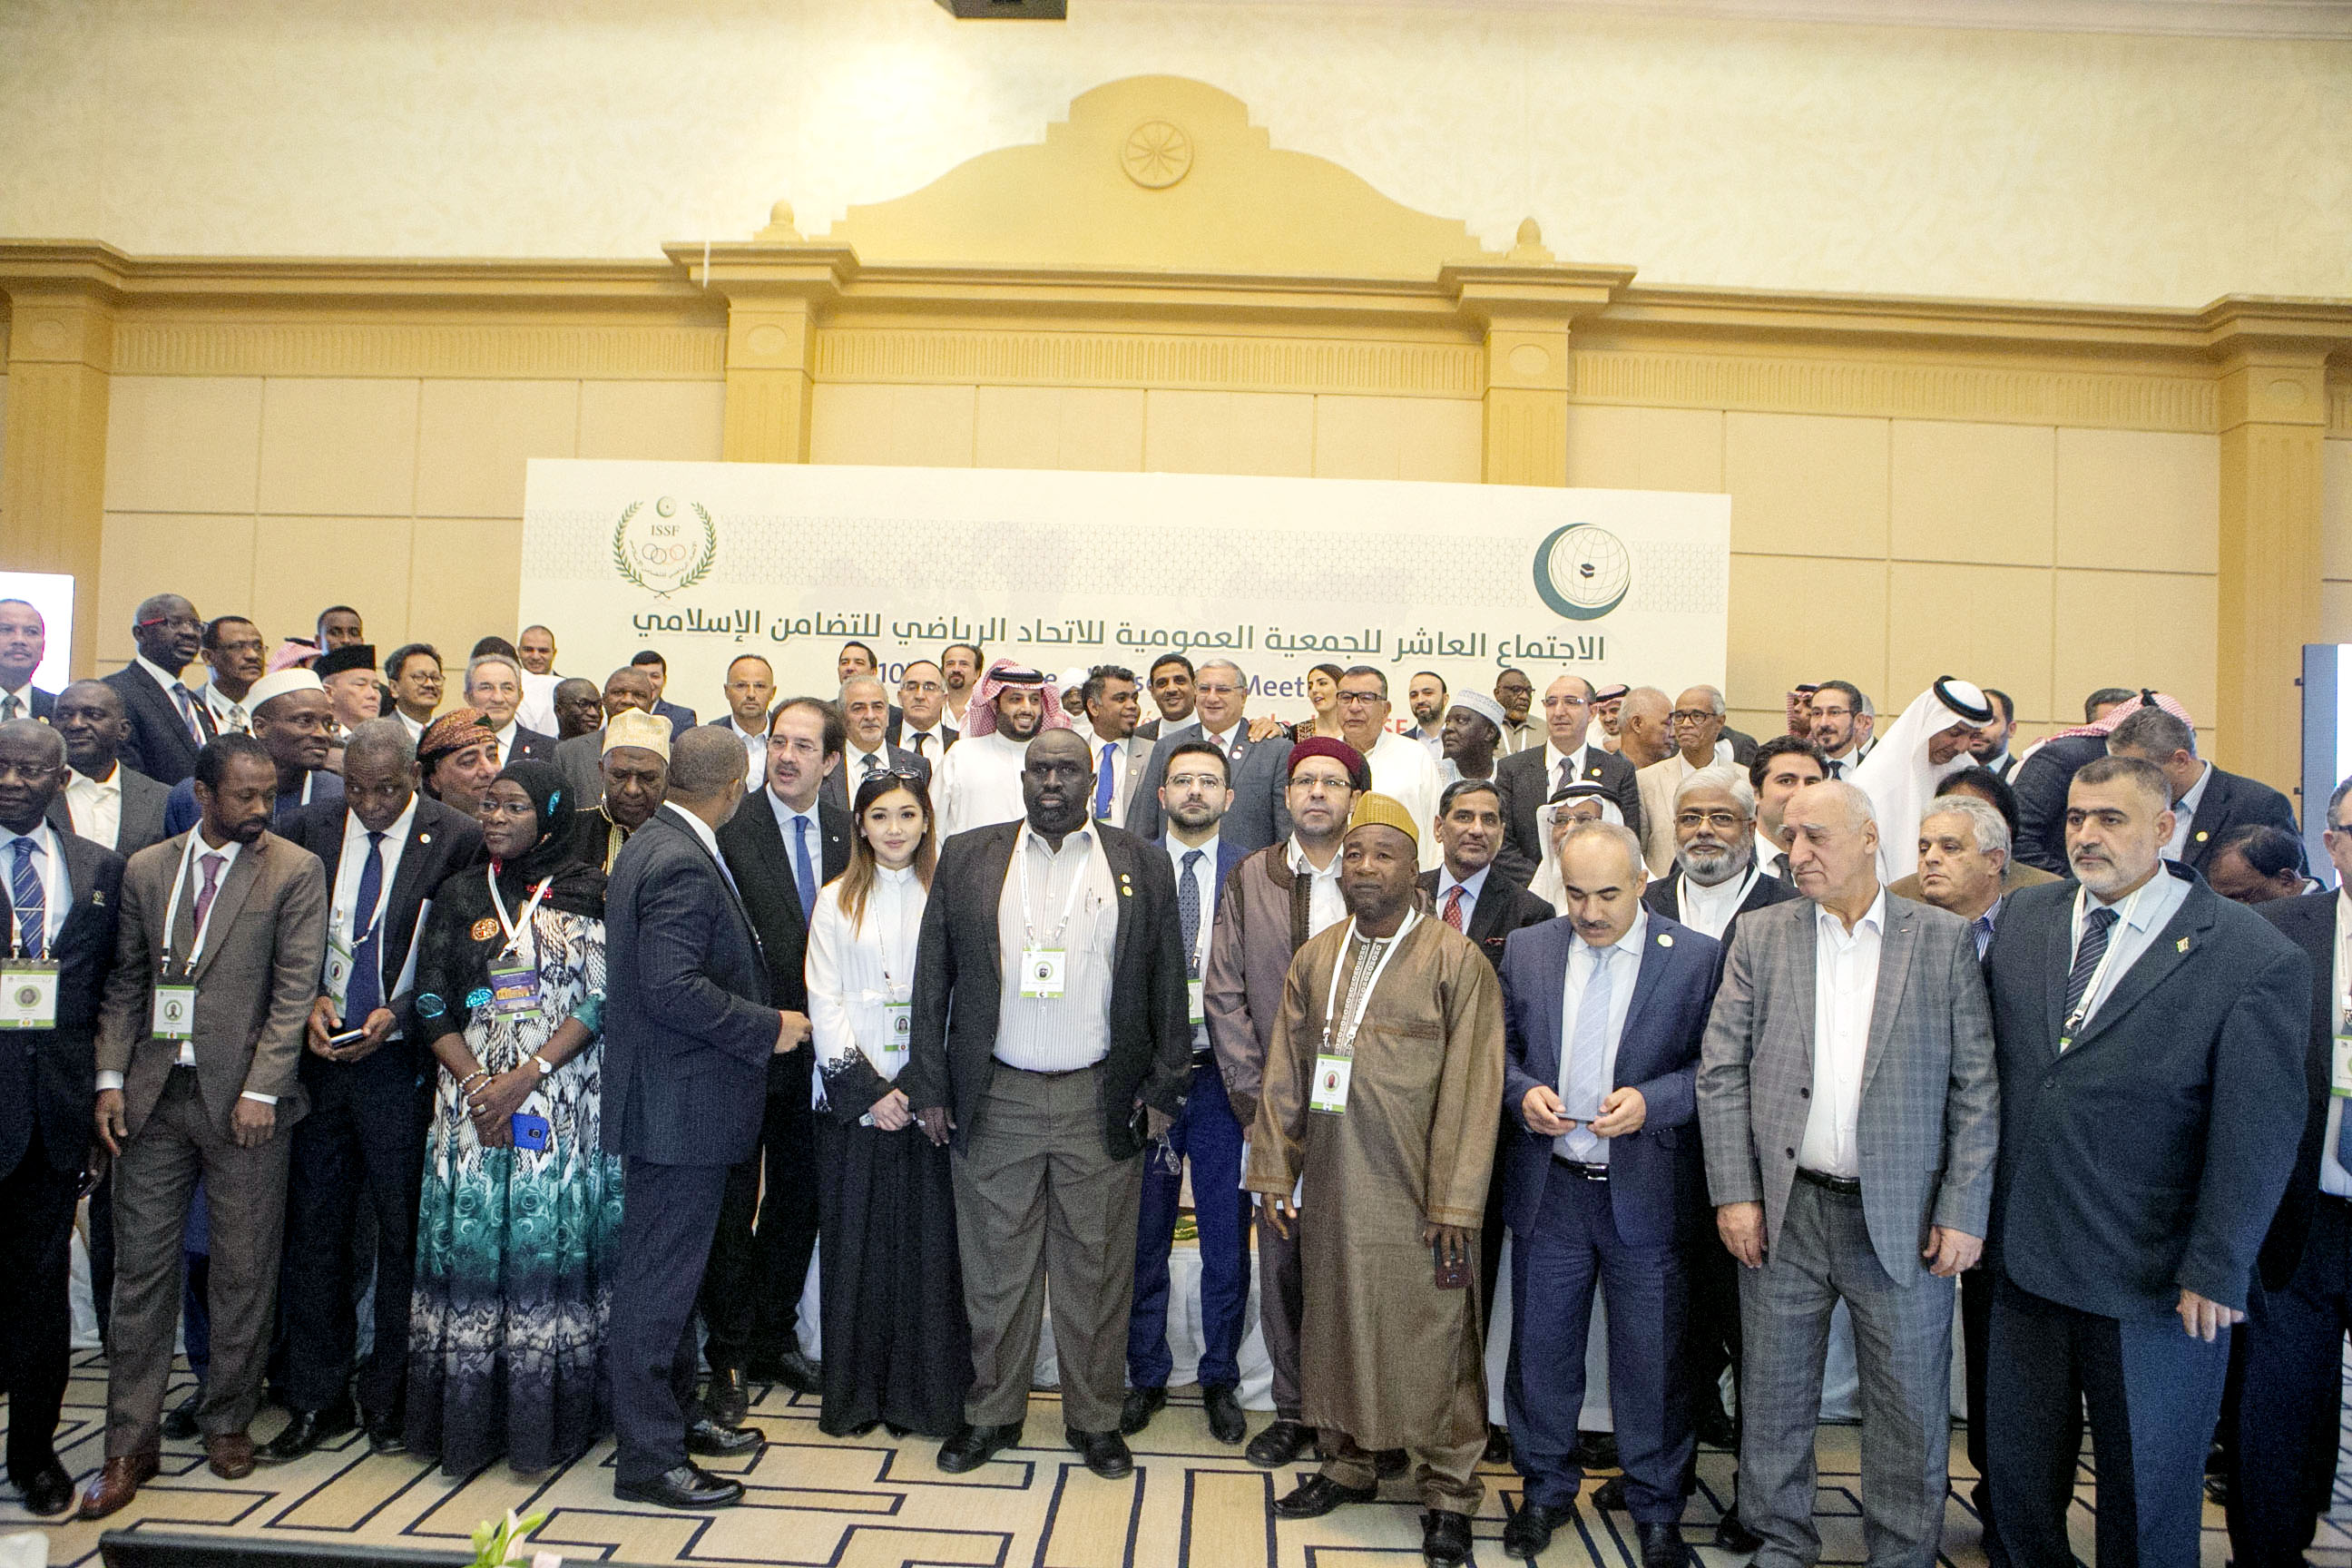  ISSF holds its 10TH GENERAL ASSEMBLY